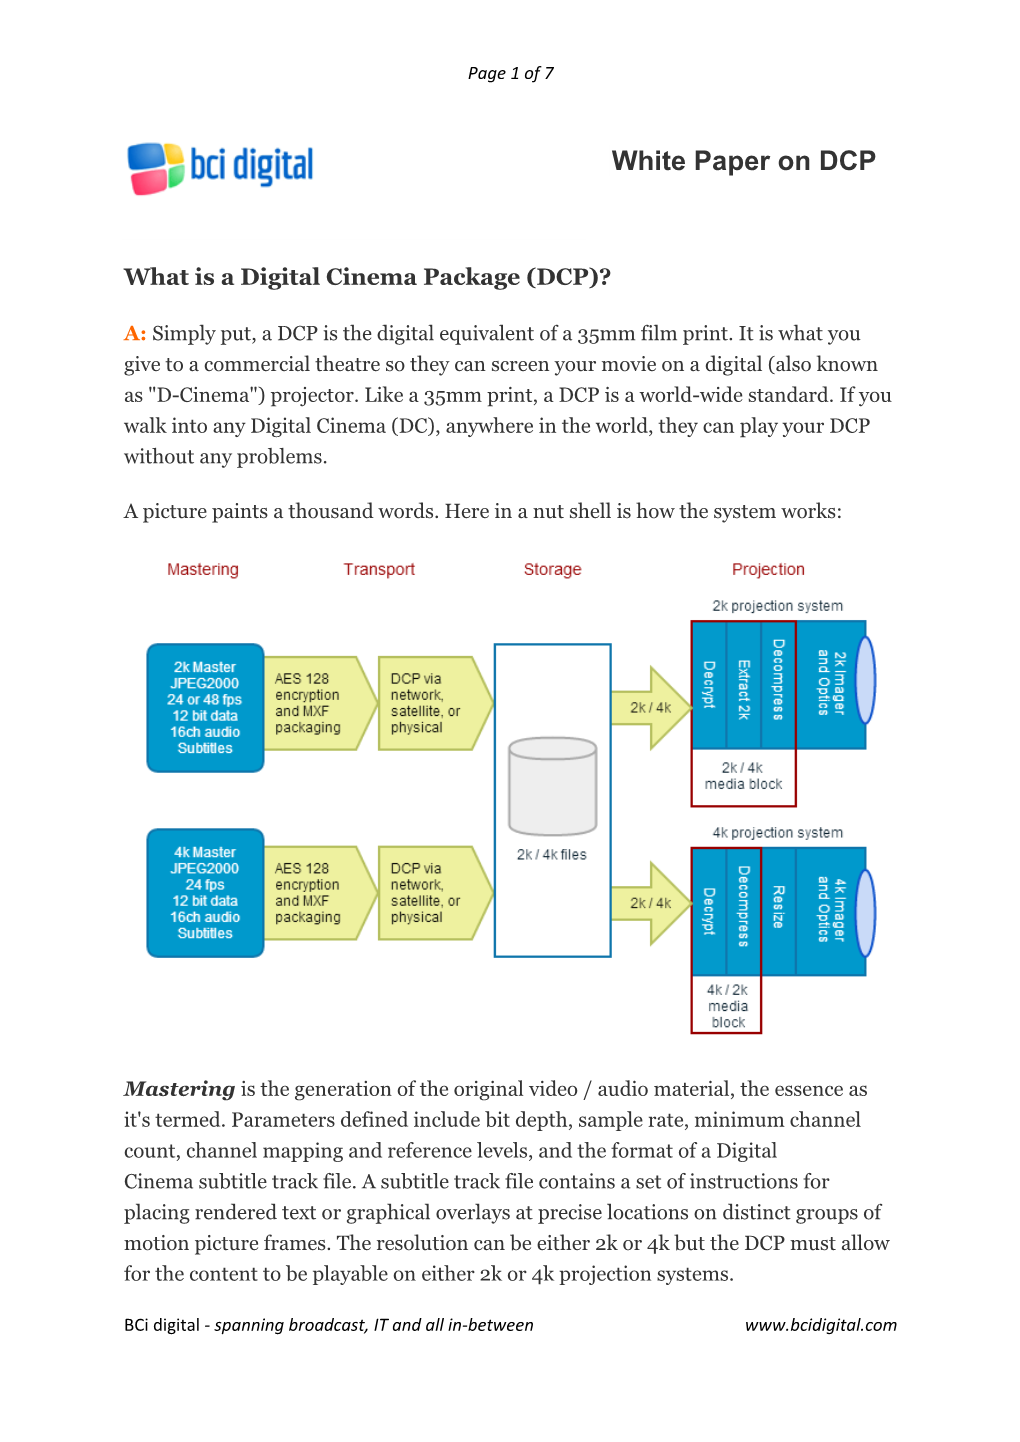 White Paper on DCP